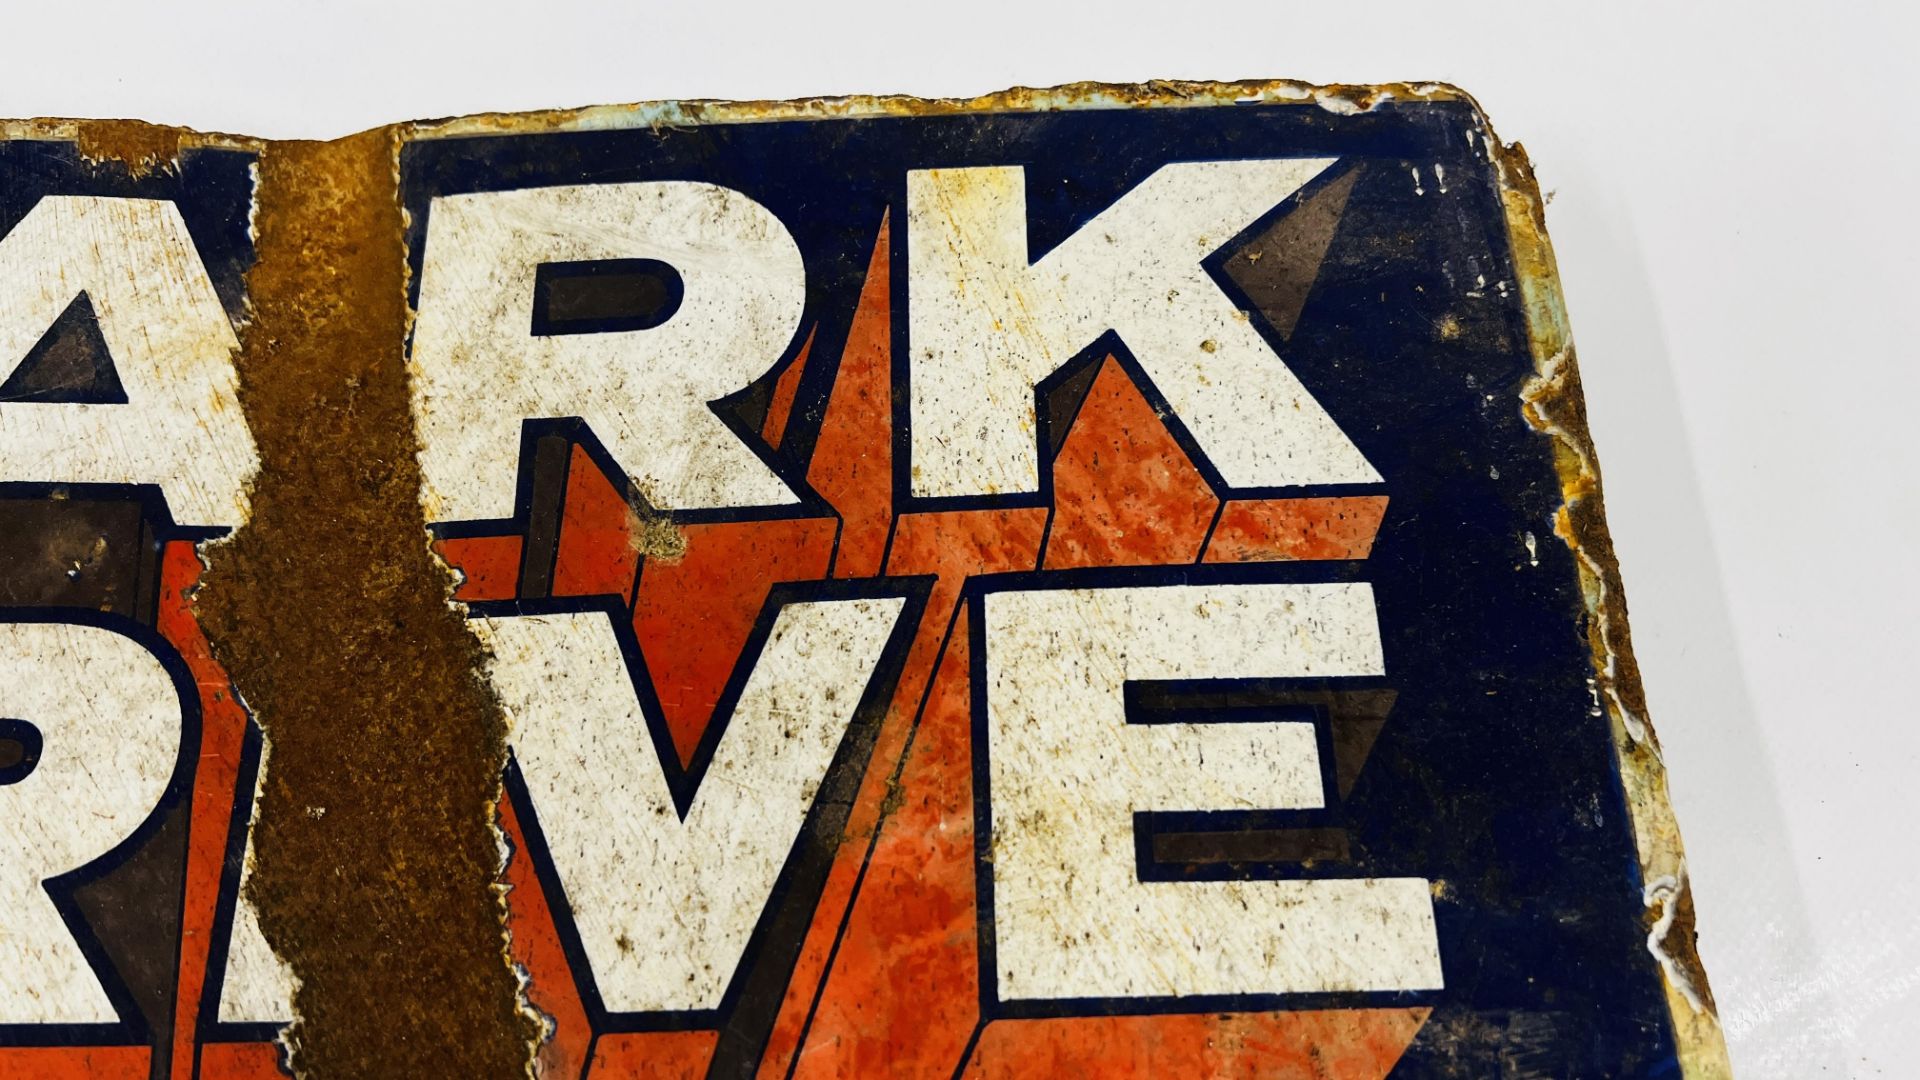 AN ORIGINAL VINTAGE DOUBLE SIDED ENAMEL SIGN "PARK DRIVE" PLAIN & CORK TIPPED (SIGNS OF EXTENSIVE - Image 3 of 13